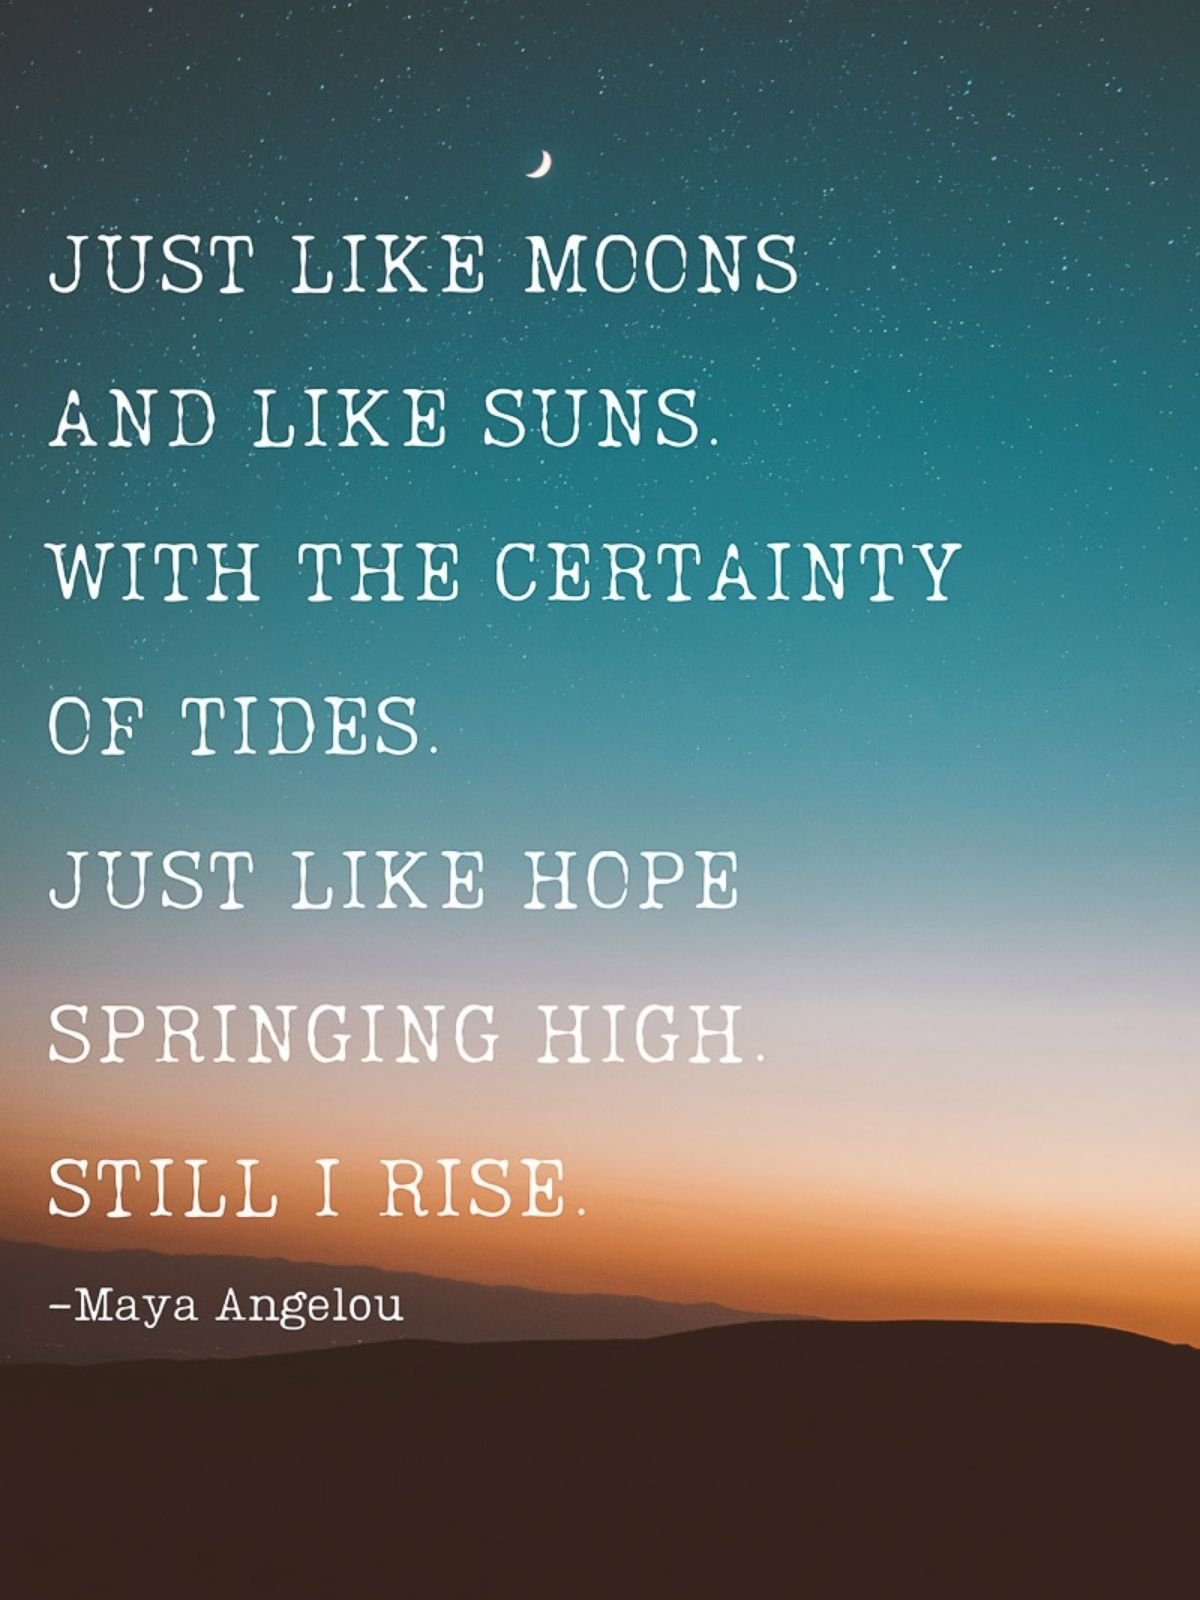 Sun and moon poems about love